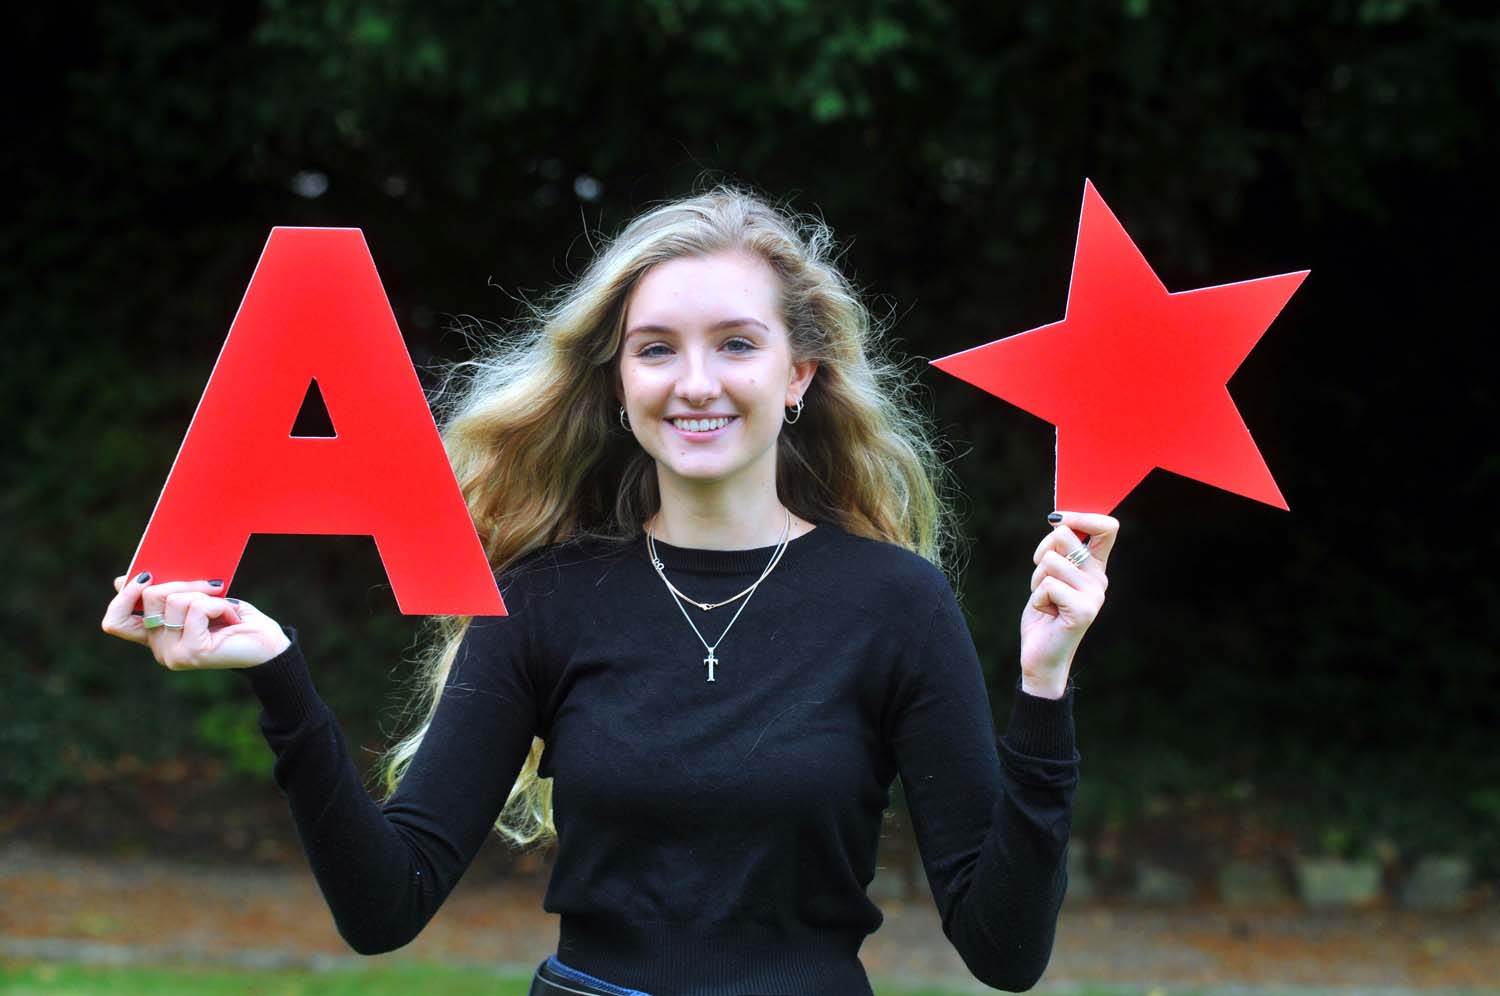 Harrogate Ladies’ College pupil, Tilly Cannon celebrates A* grades and a place at Manchester University